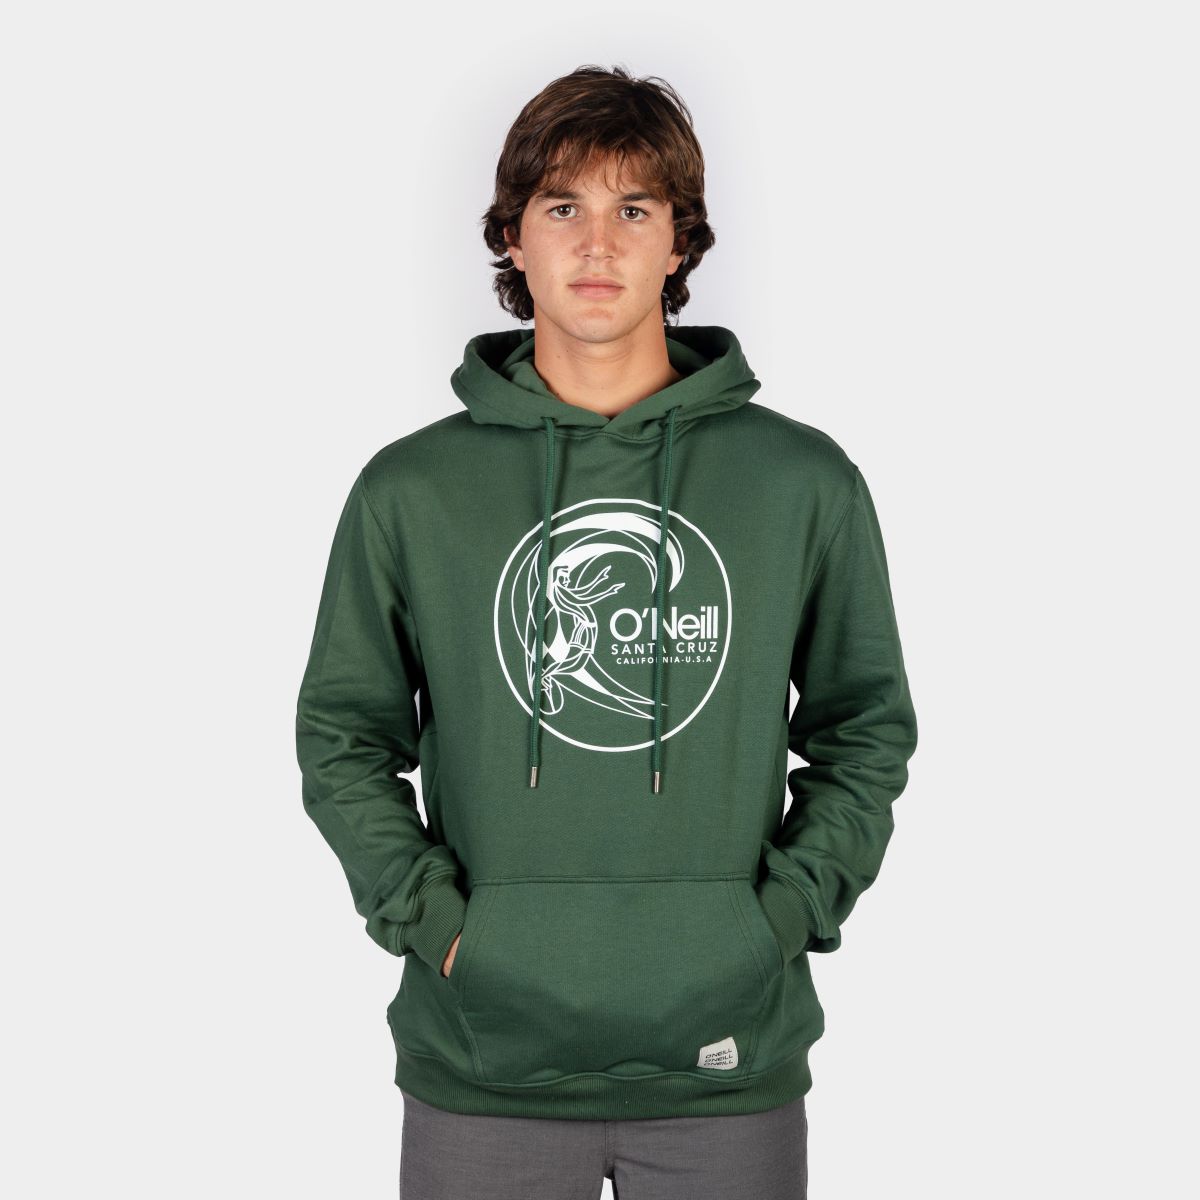 POLERON HOMBRE - CIRCLE SURFER HOODIE - MILITARY GREEN - IN87